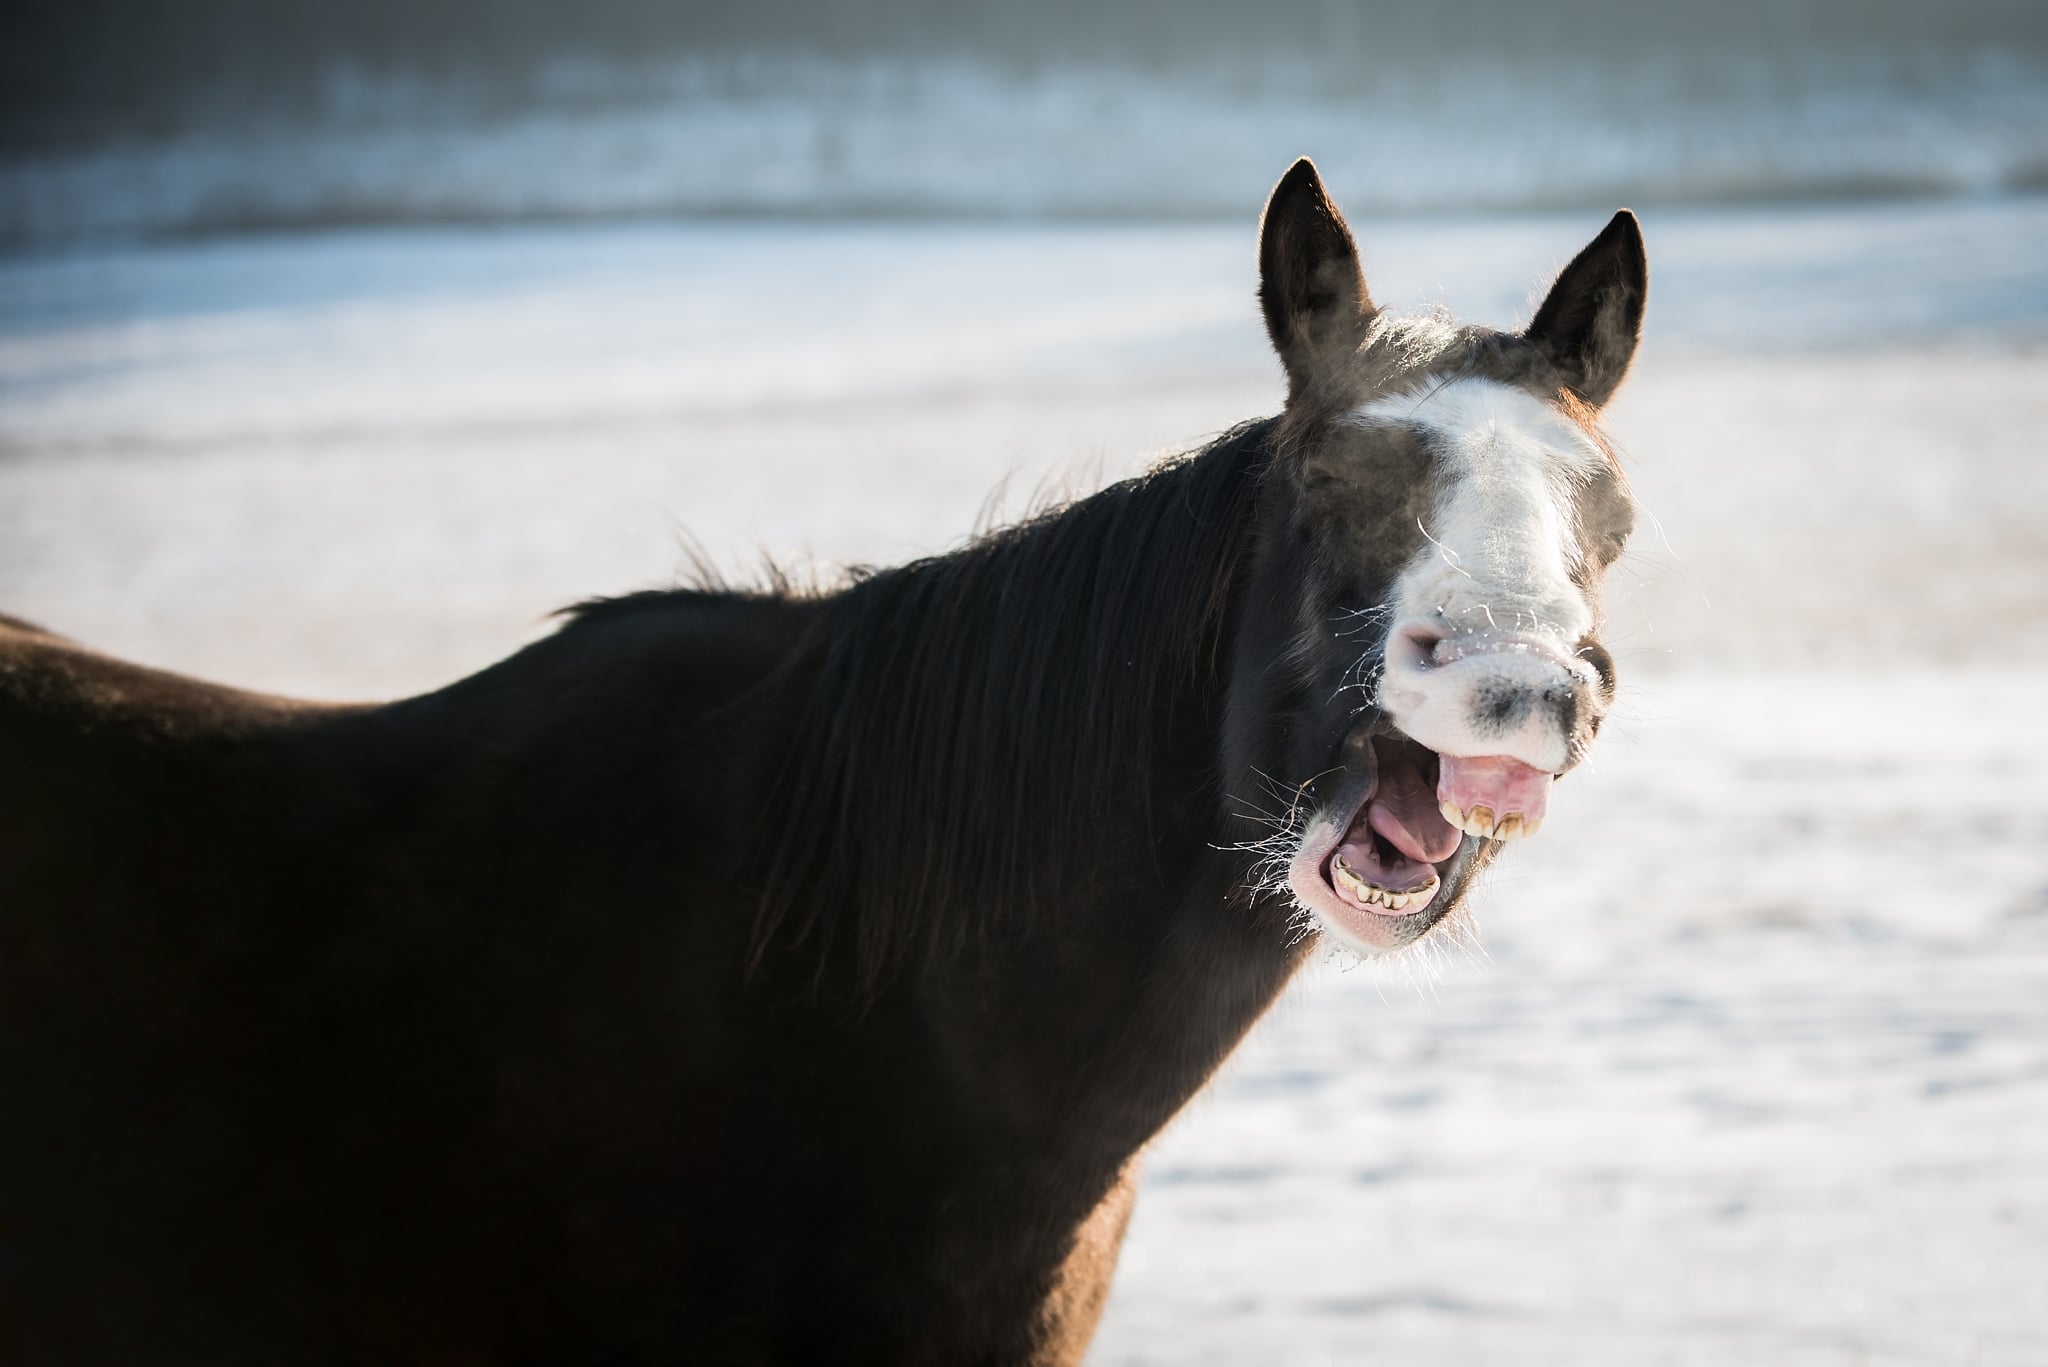 How Do You Get Great Horse Photos? Soap On, Ears Forward, and Watch That Composition!